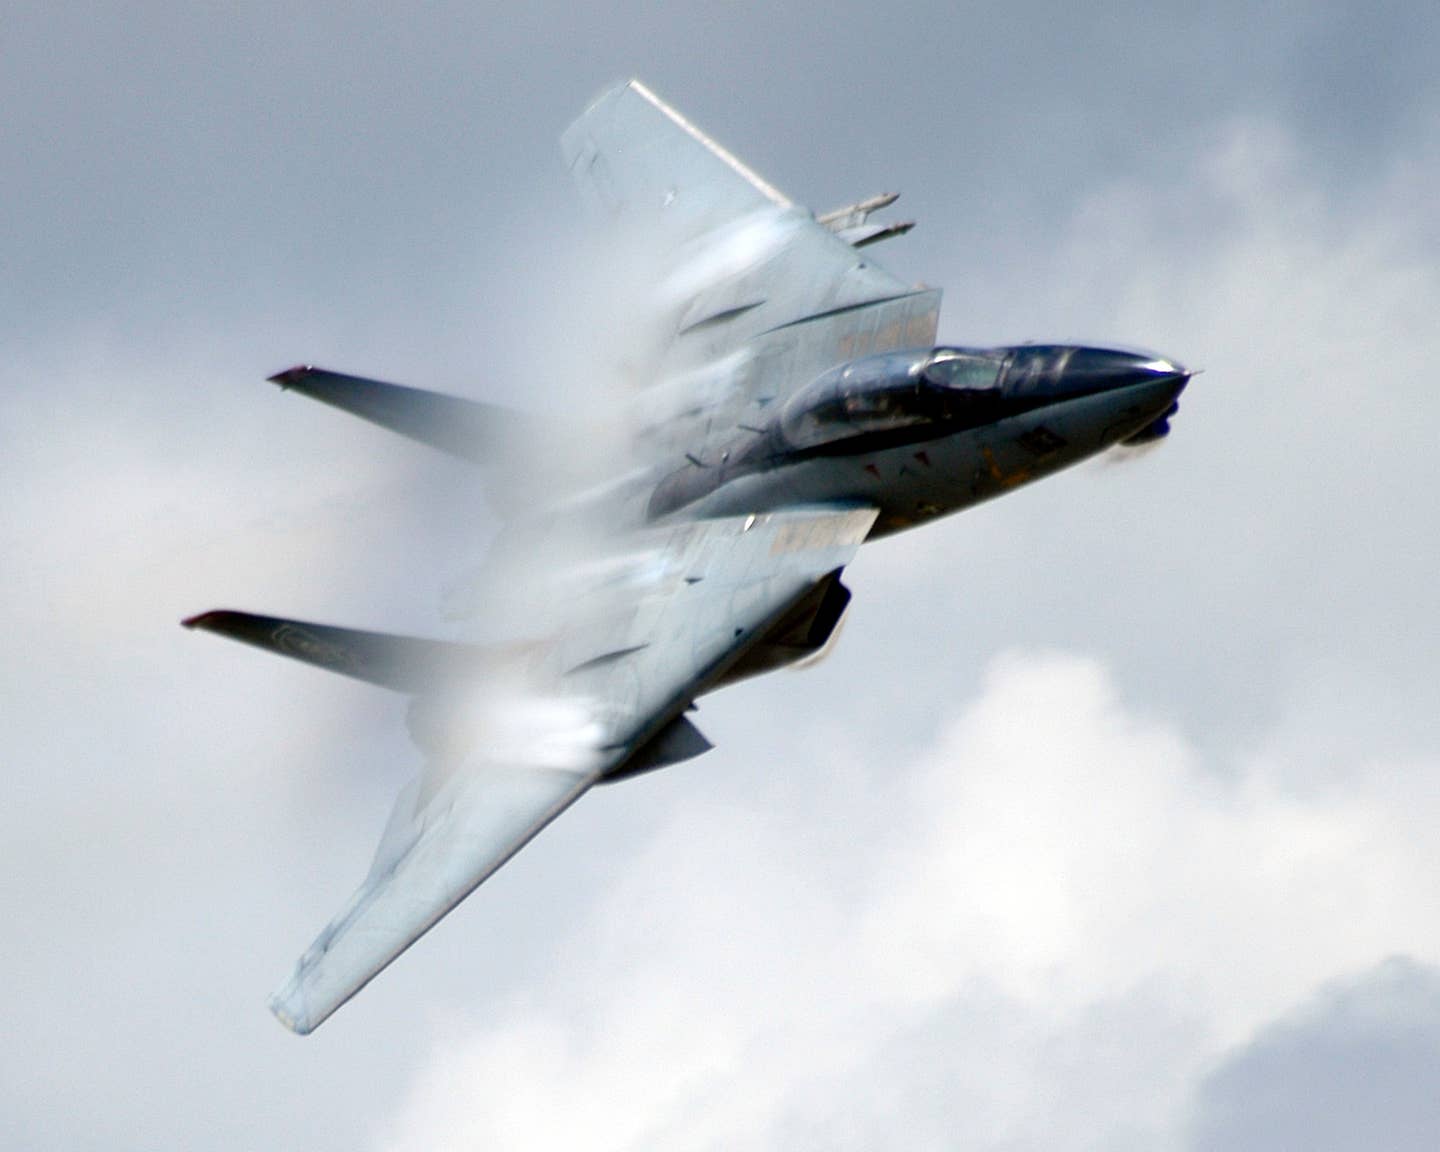 An F-14D during a high-speed flyby at an airshow. Credit: USN.